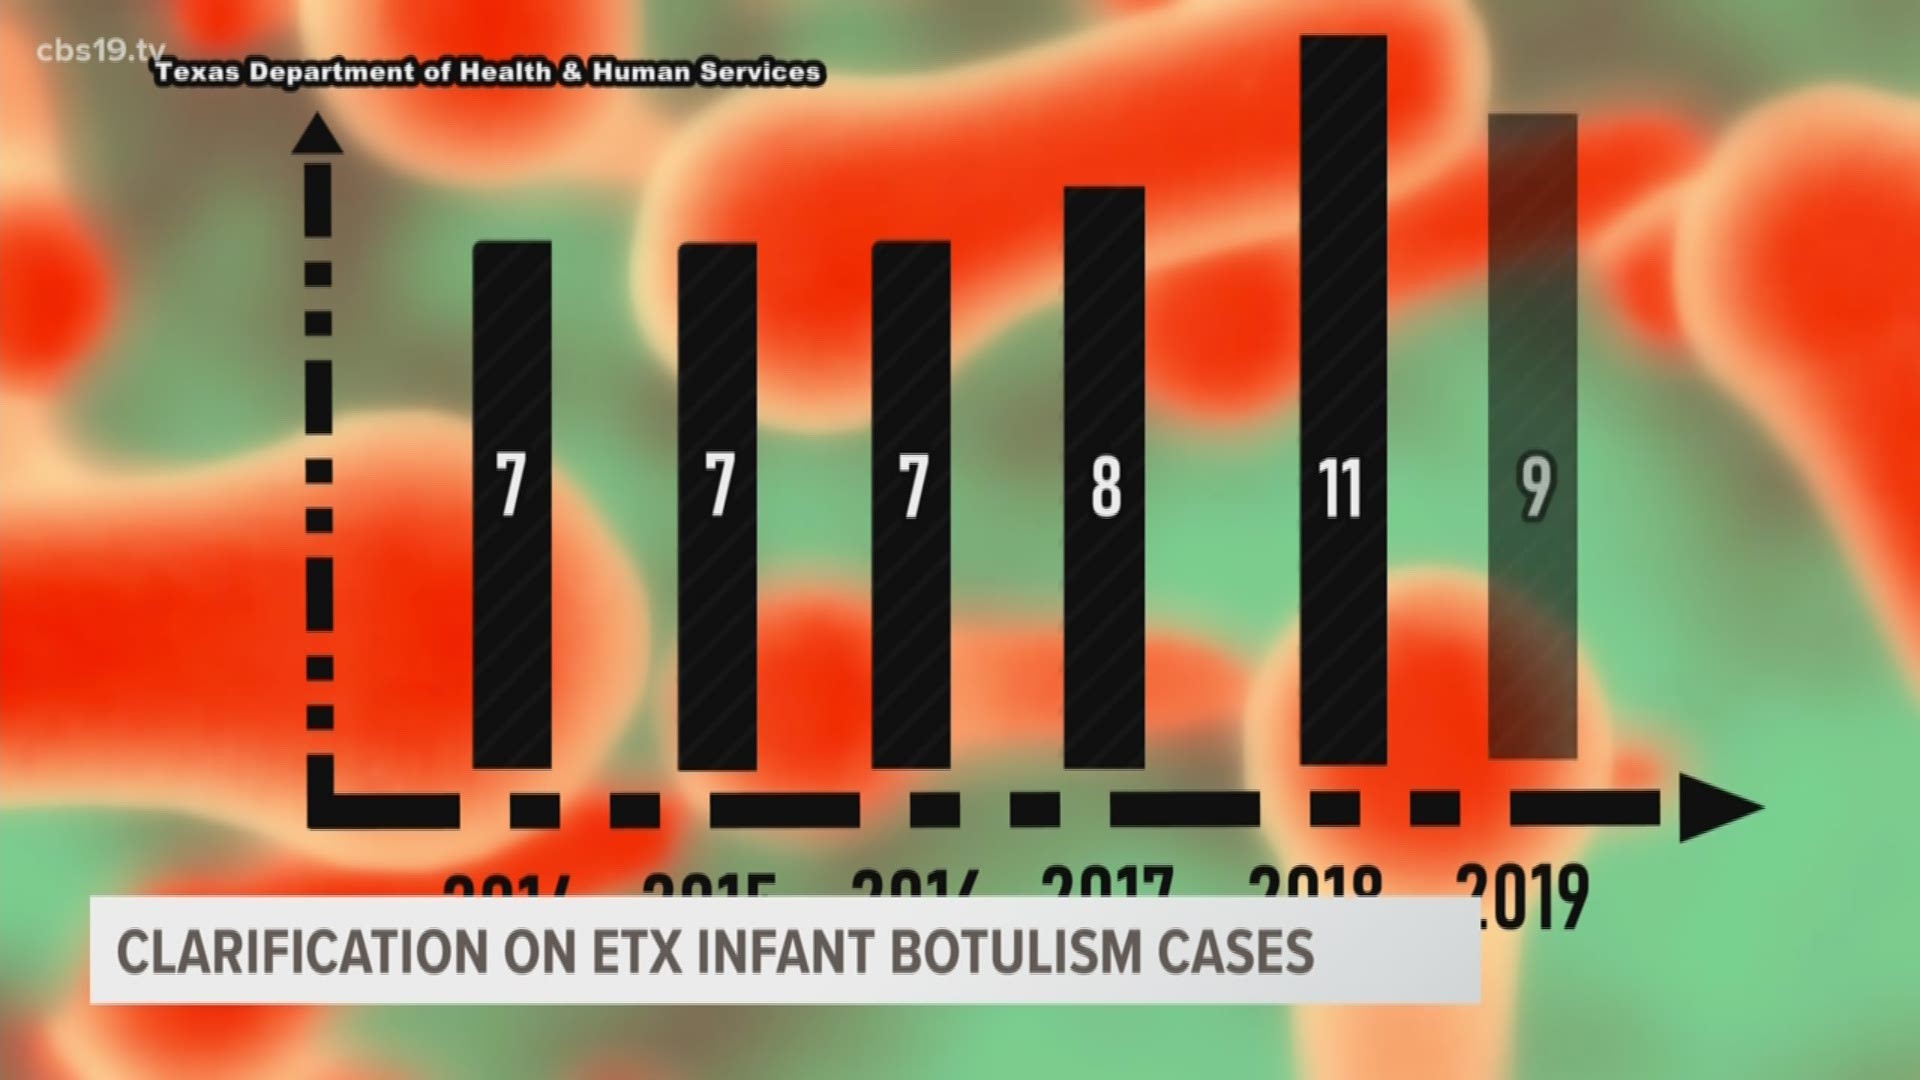 In the last six years, Texas has had 49 confirmed cases of infant botulism. On average, the state has seven to eight cases each year.